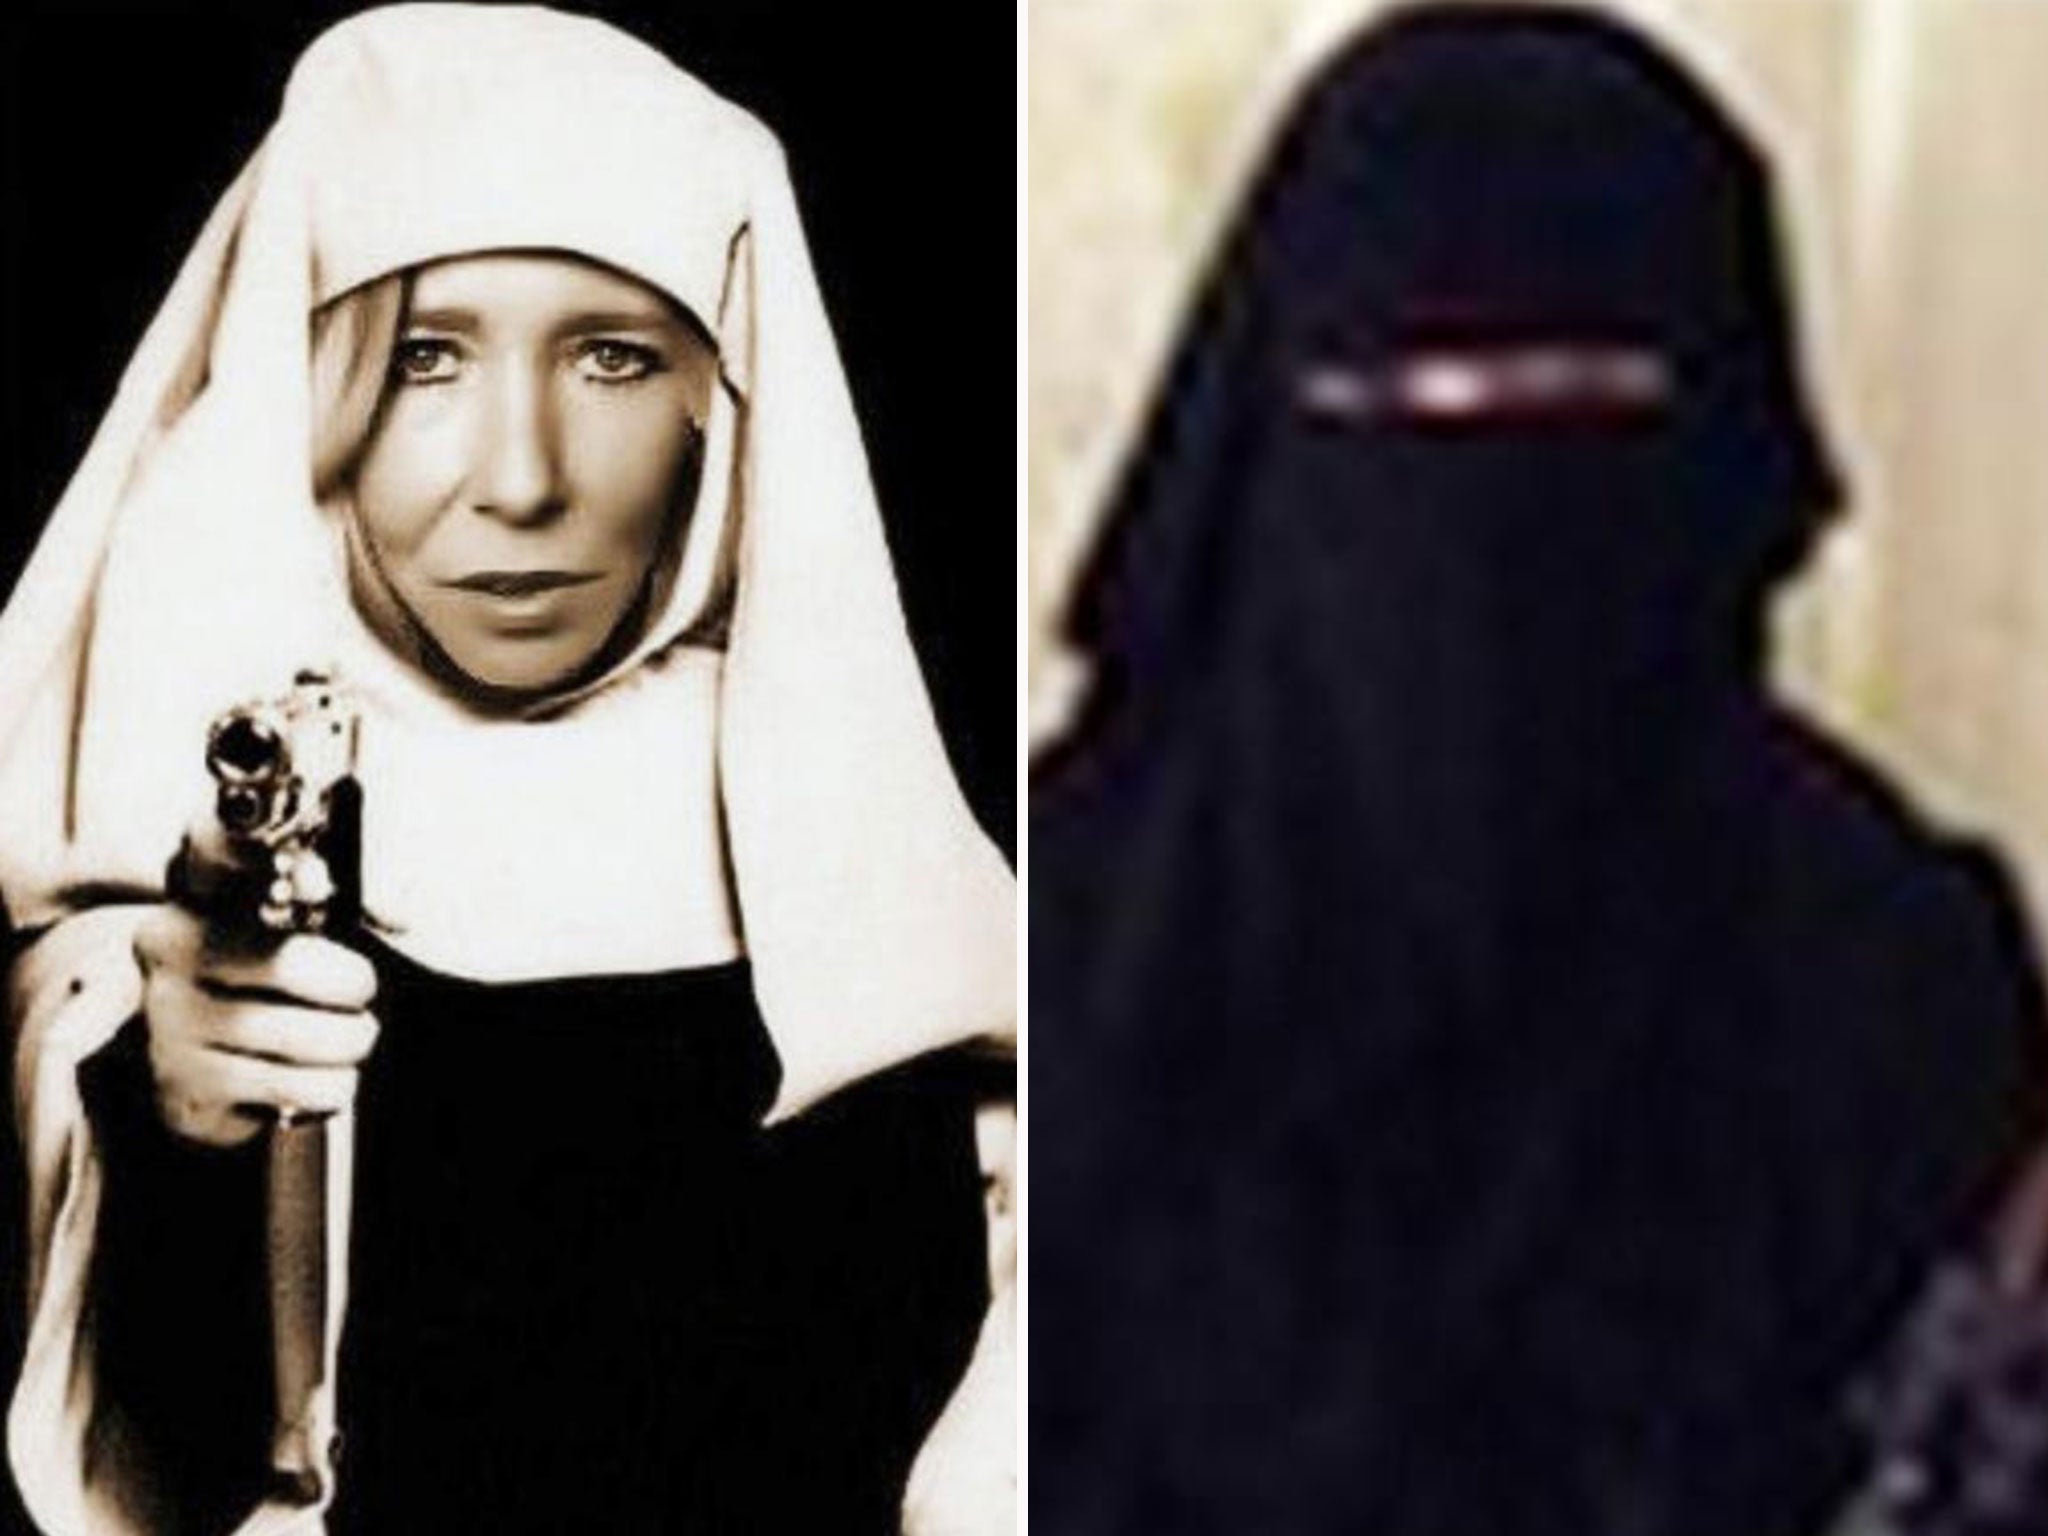 The image used on Sally Jones Twitter photo and as Umm Hussain al-Britani, right, and in a edited photo posted online